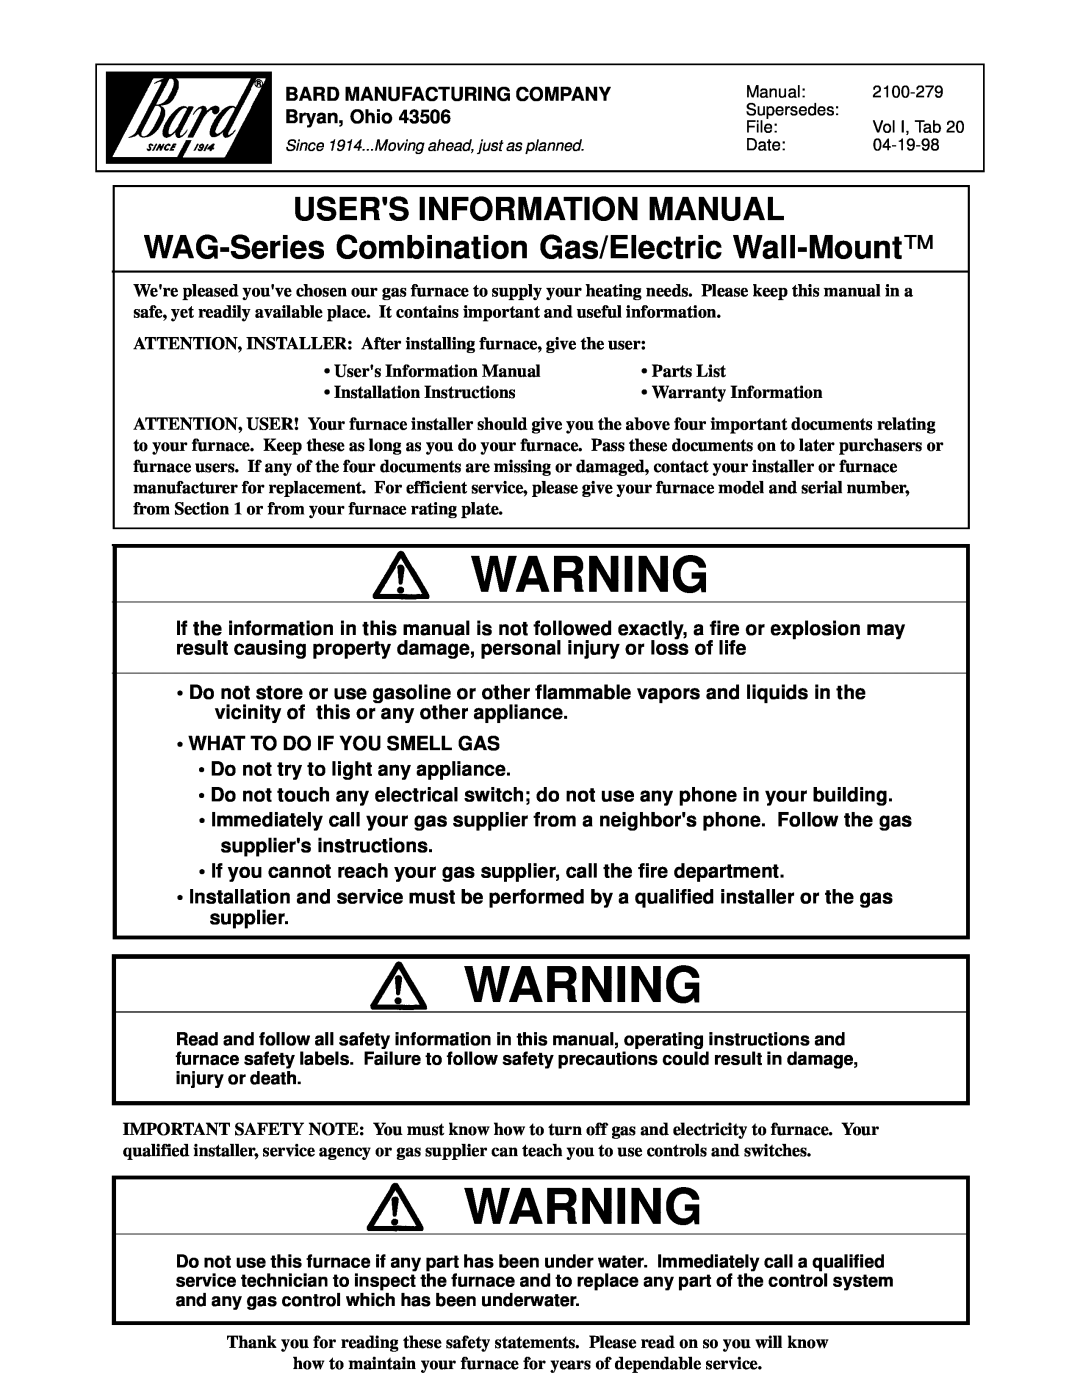 3Com 43506 operating instructions Users Information Manual, WAG-SeriesCombination Gas/Electric Wall-Mount 